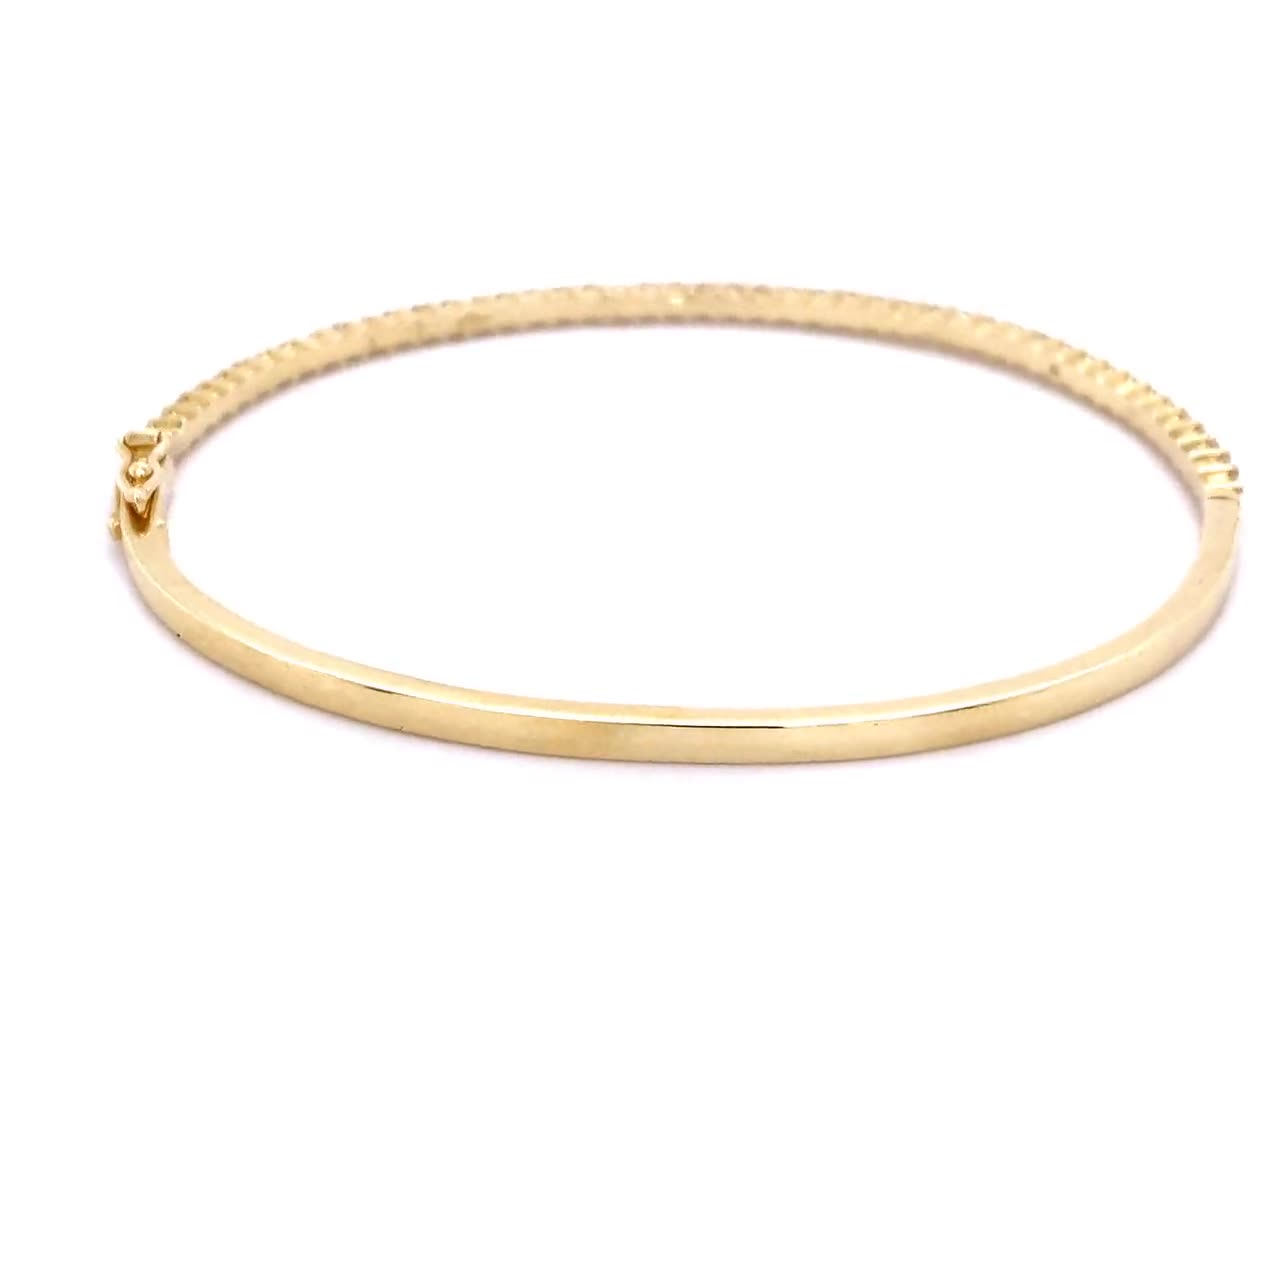 Flat Plain Gold Bracelet / Wide 6 MM Thick Sturdy Bangle / Solid 14k Yellow  Gold Oval Bangle / 6 to 8 Inches Bangle / Heavy 25 Grams Bangle 